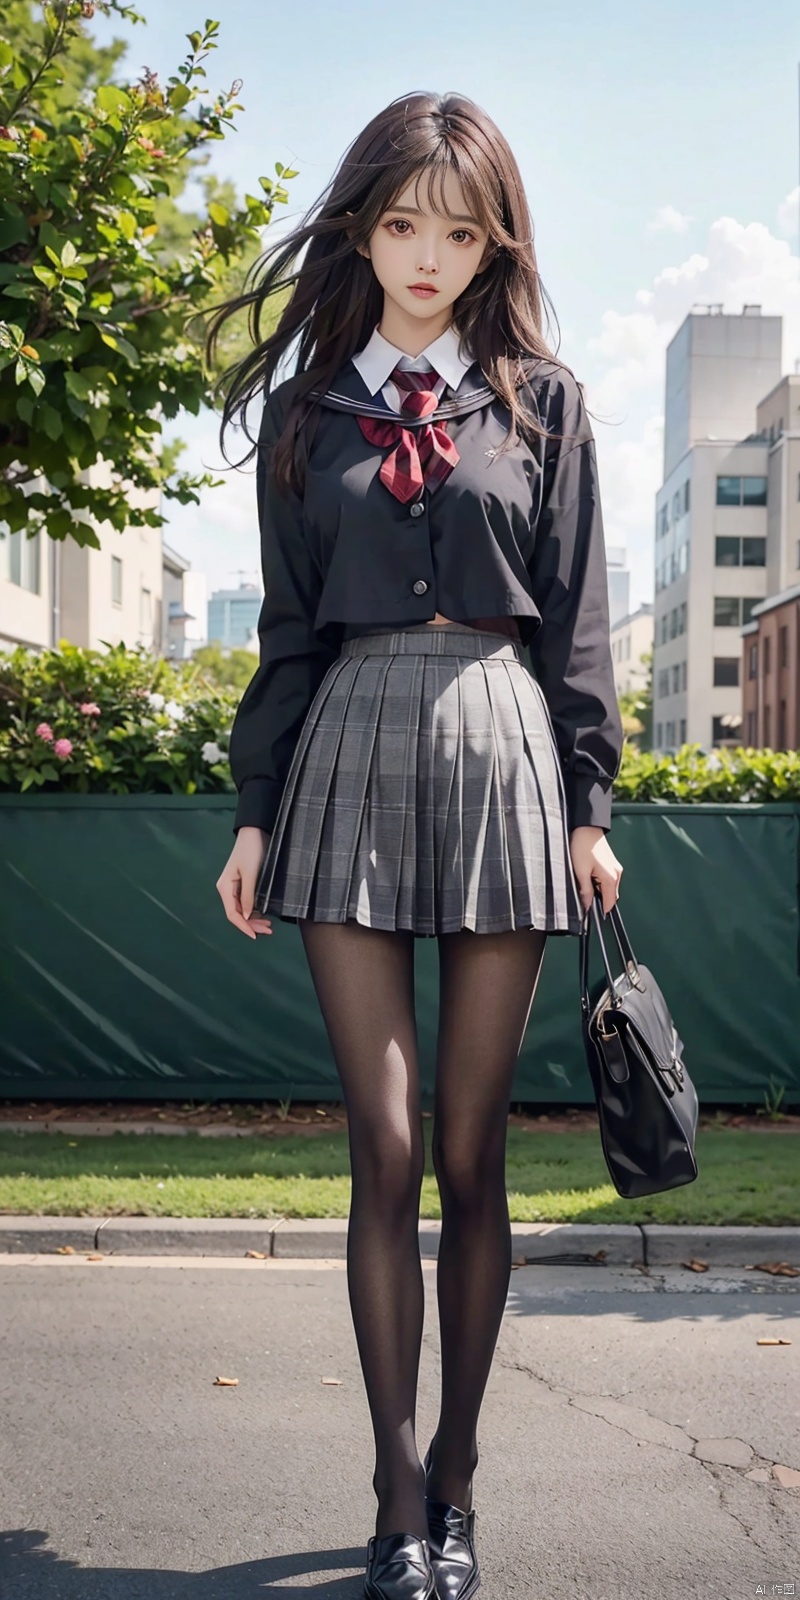  (Good structure),HDR, UHD, 8K, A real person , Highly detailed, best quality, masterpiece, 1girl, realistic, Highly detailed, (EOS R8, 50mm, F1.2, 8K, RAW photo:1.2), ultra realistic 8k cg,outdoor,school,campus,
 full_body,perfect body,shapely body,big boobs,
big breasts,perfect legs,
black ,loafers, plaid skirt, black_footwear,school uniform,,looking_at_viewer,outside,xuner,black ,standing,wangyushan, blackpantyhose